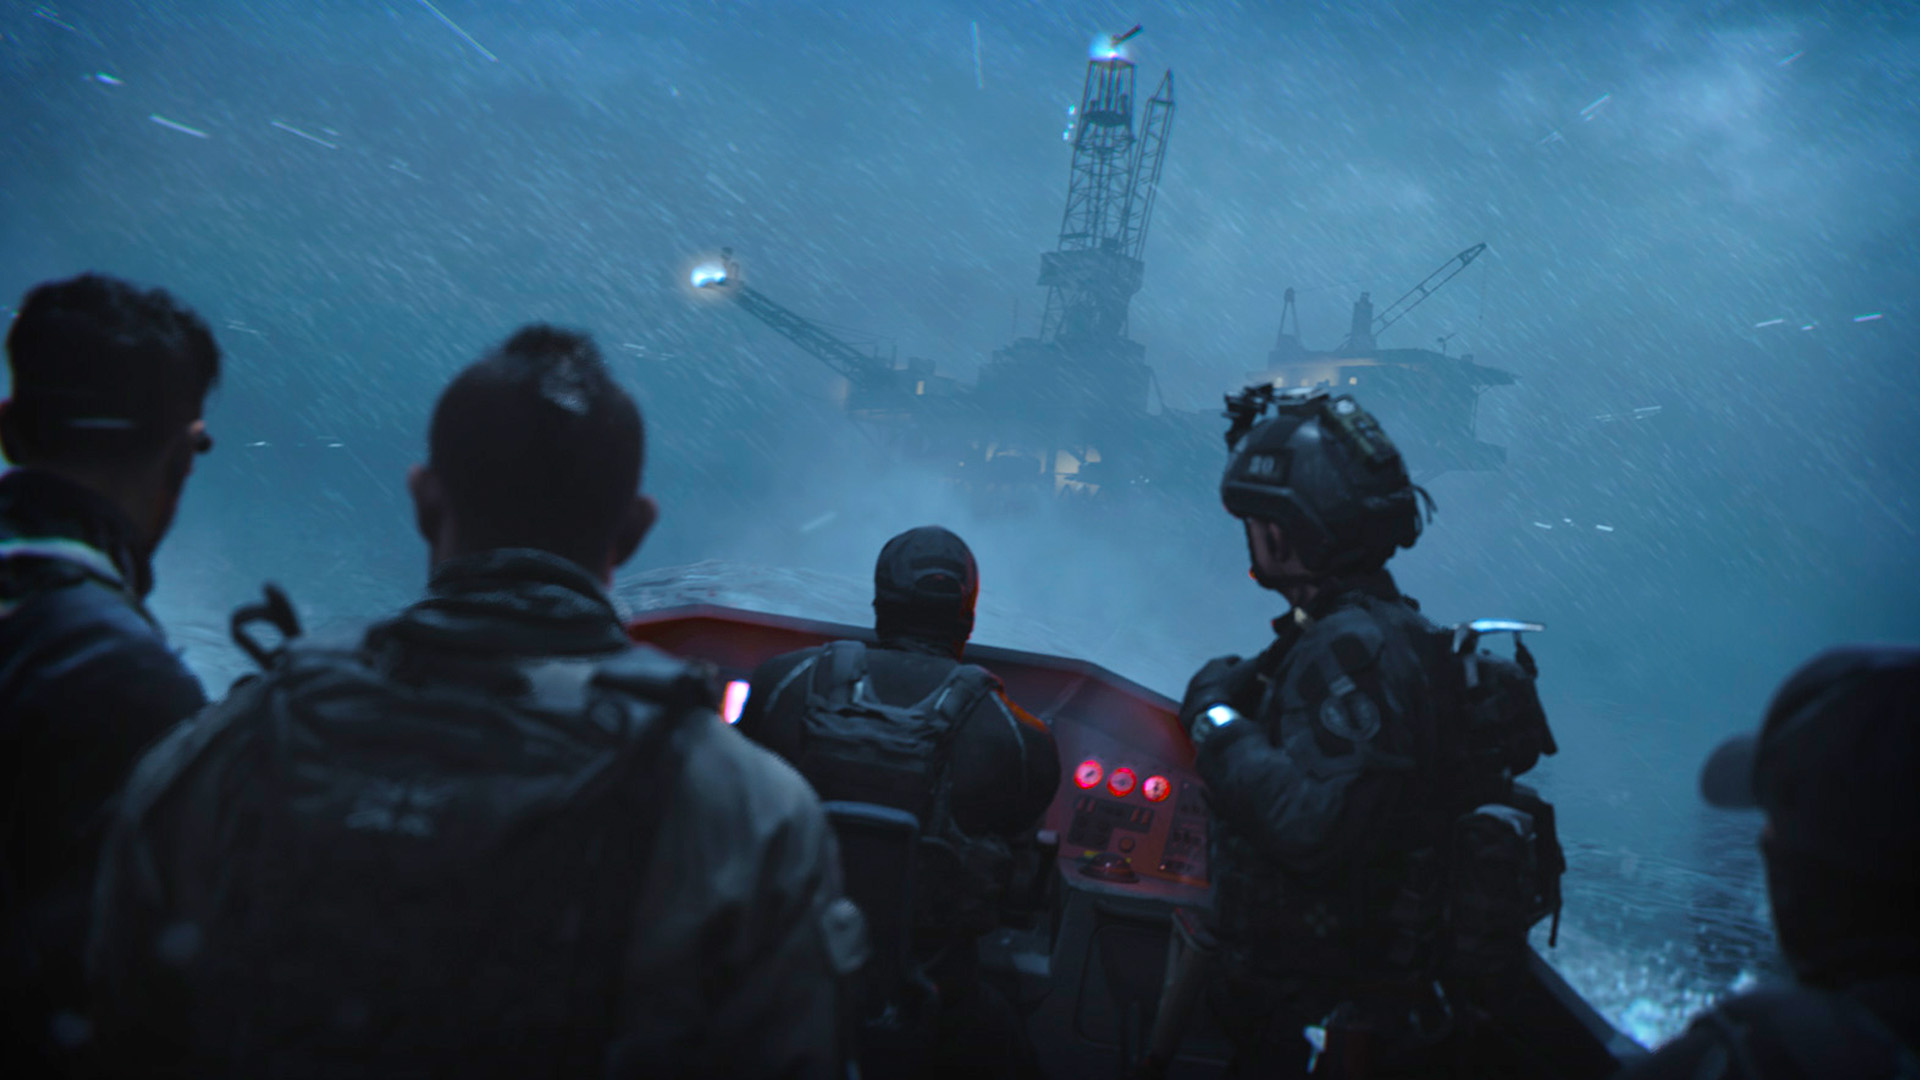 Call of Duty Warzone 2 release date: five soldiers traveling towards a ship in a small boat at night